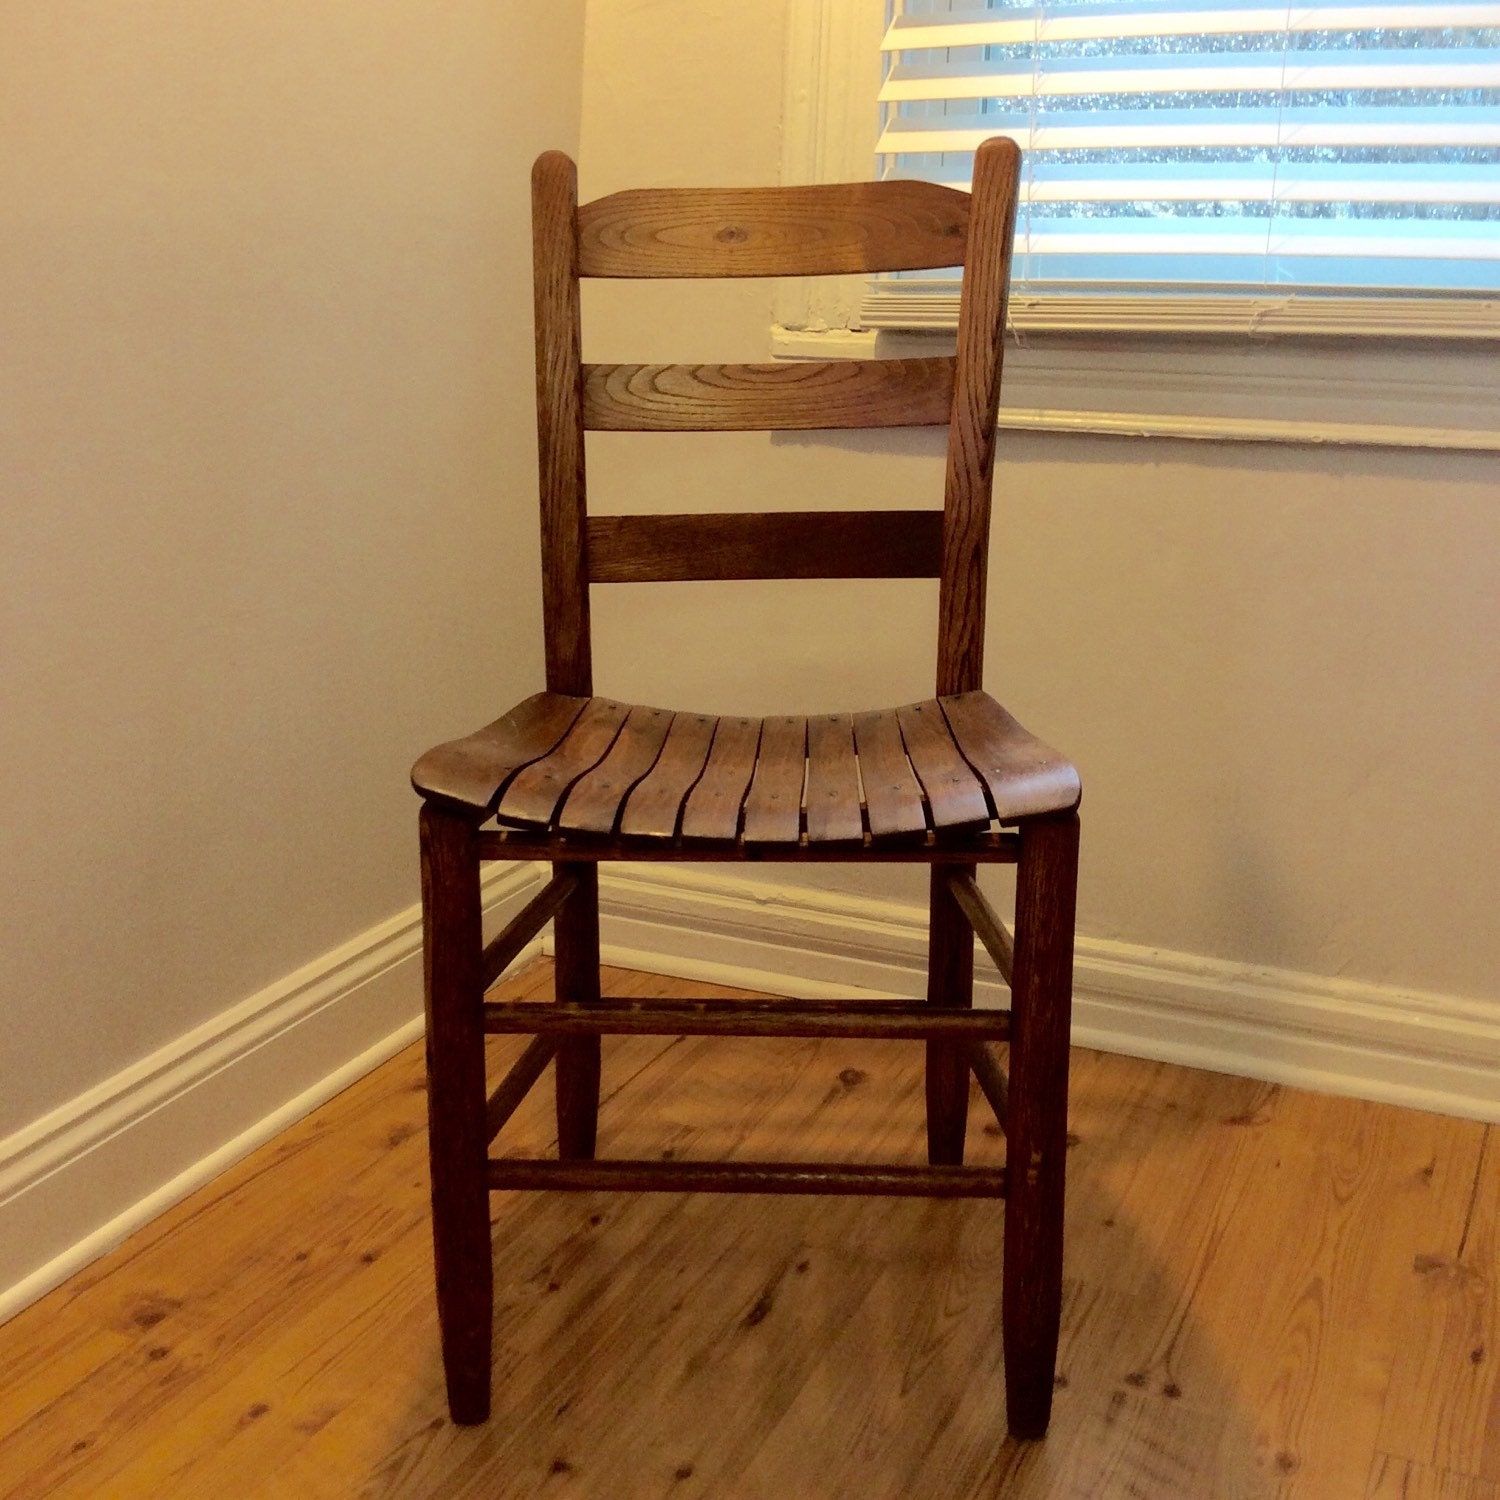 Antique Ladder Back Chair With A Slat, Vintage Wooden Ladder Back Chairs